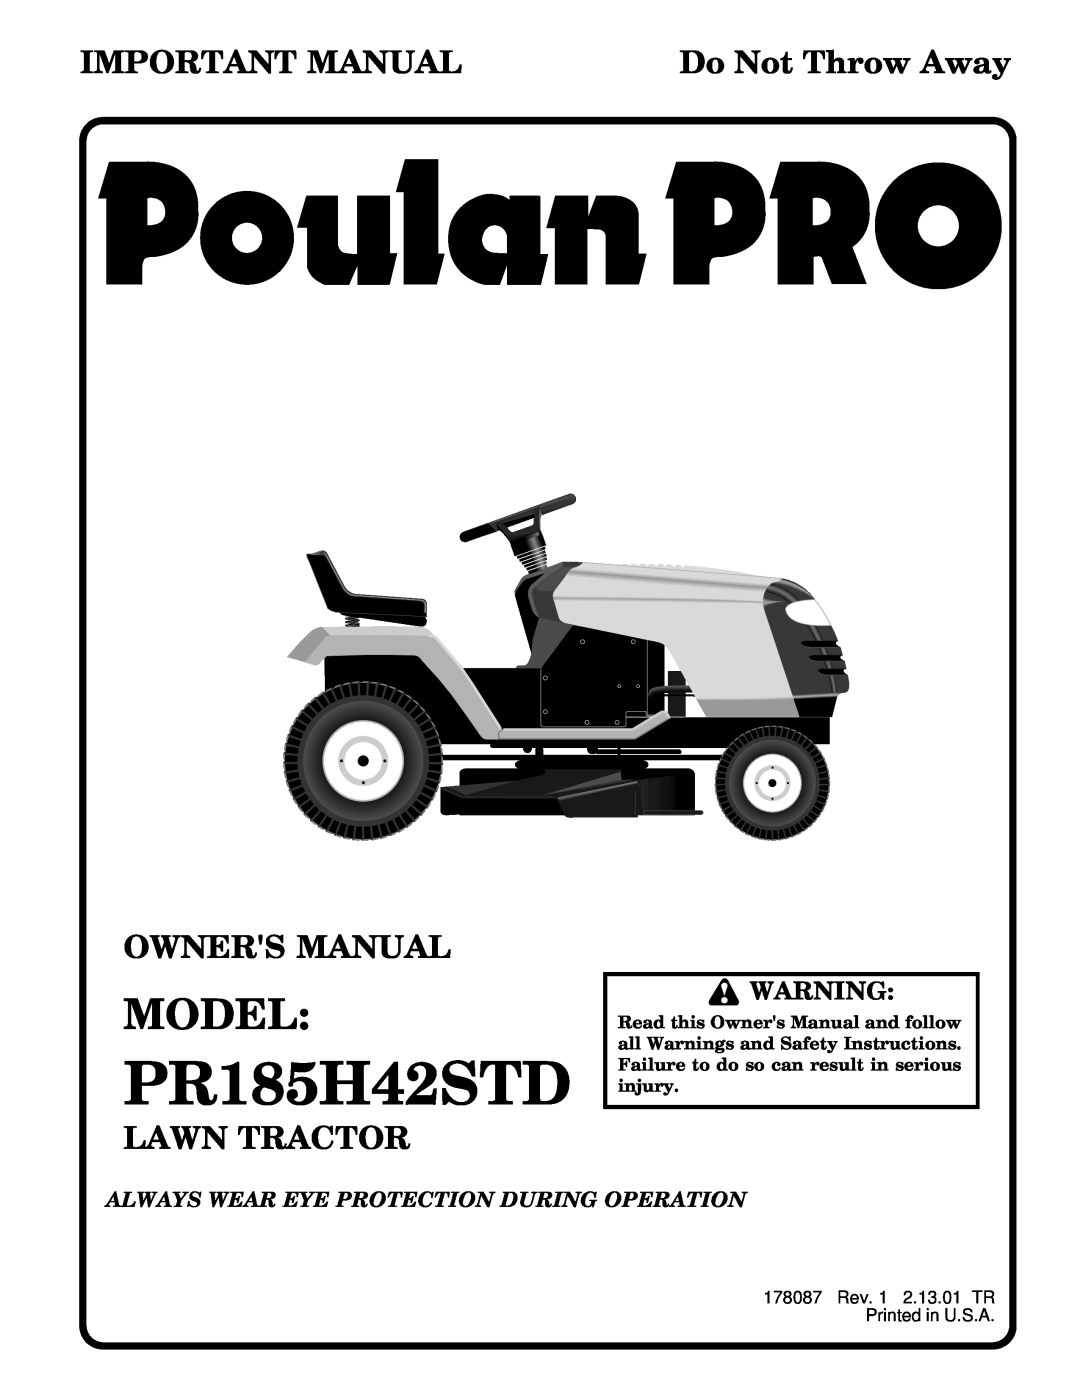 Poulan 178087 owner manual Model, PR185H42STD, Important Manual, Do Not Throw Away, Lawn Tractor 